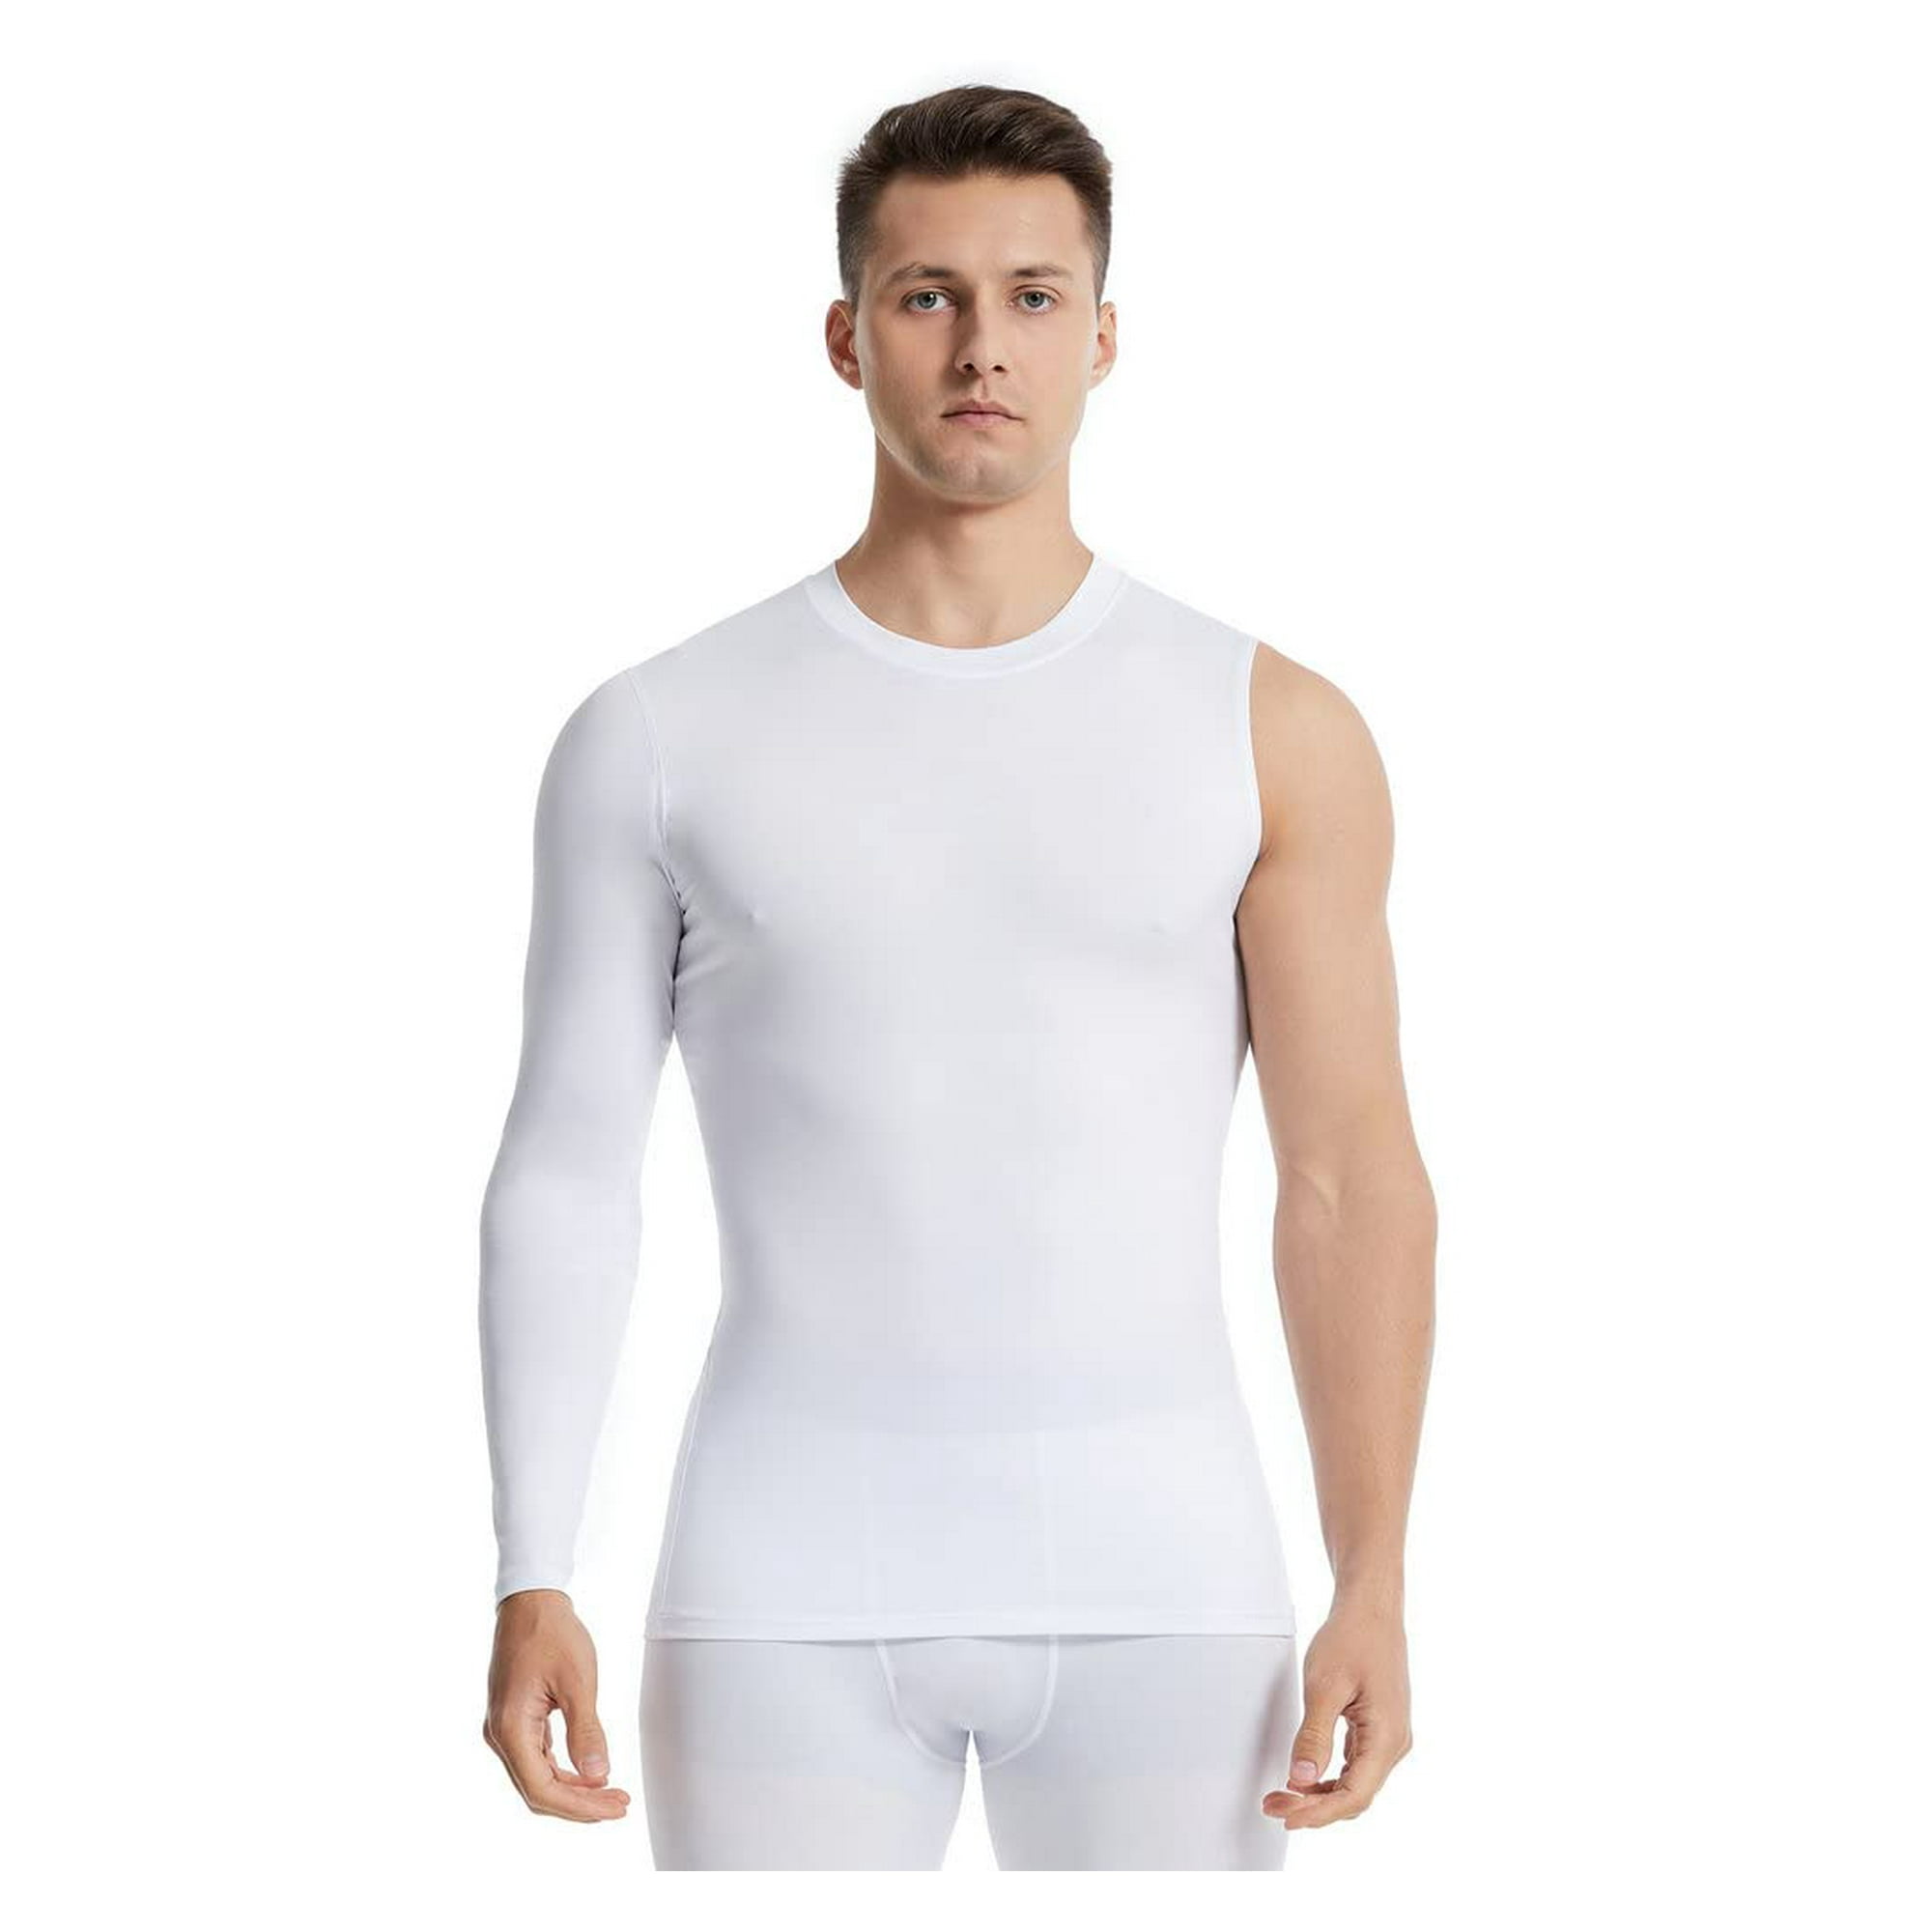 New Compression Shirts for Men 1/2 One Arm Long Sleeve Athletic Base Layer  Undershirt Gear T Shirt for Workout Basketball (Large,White-1) 